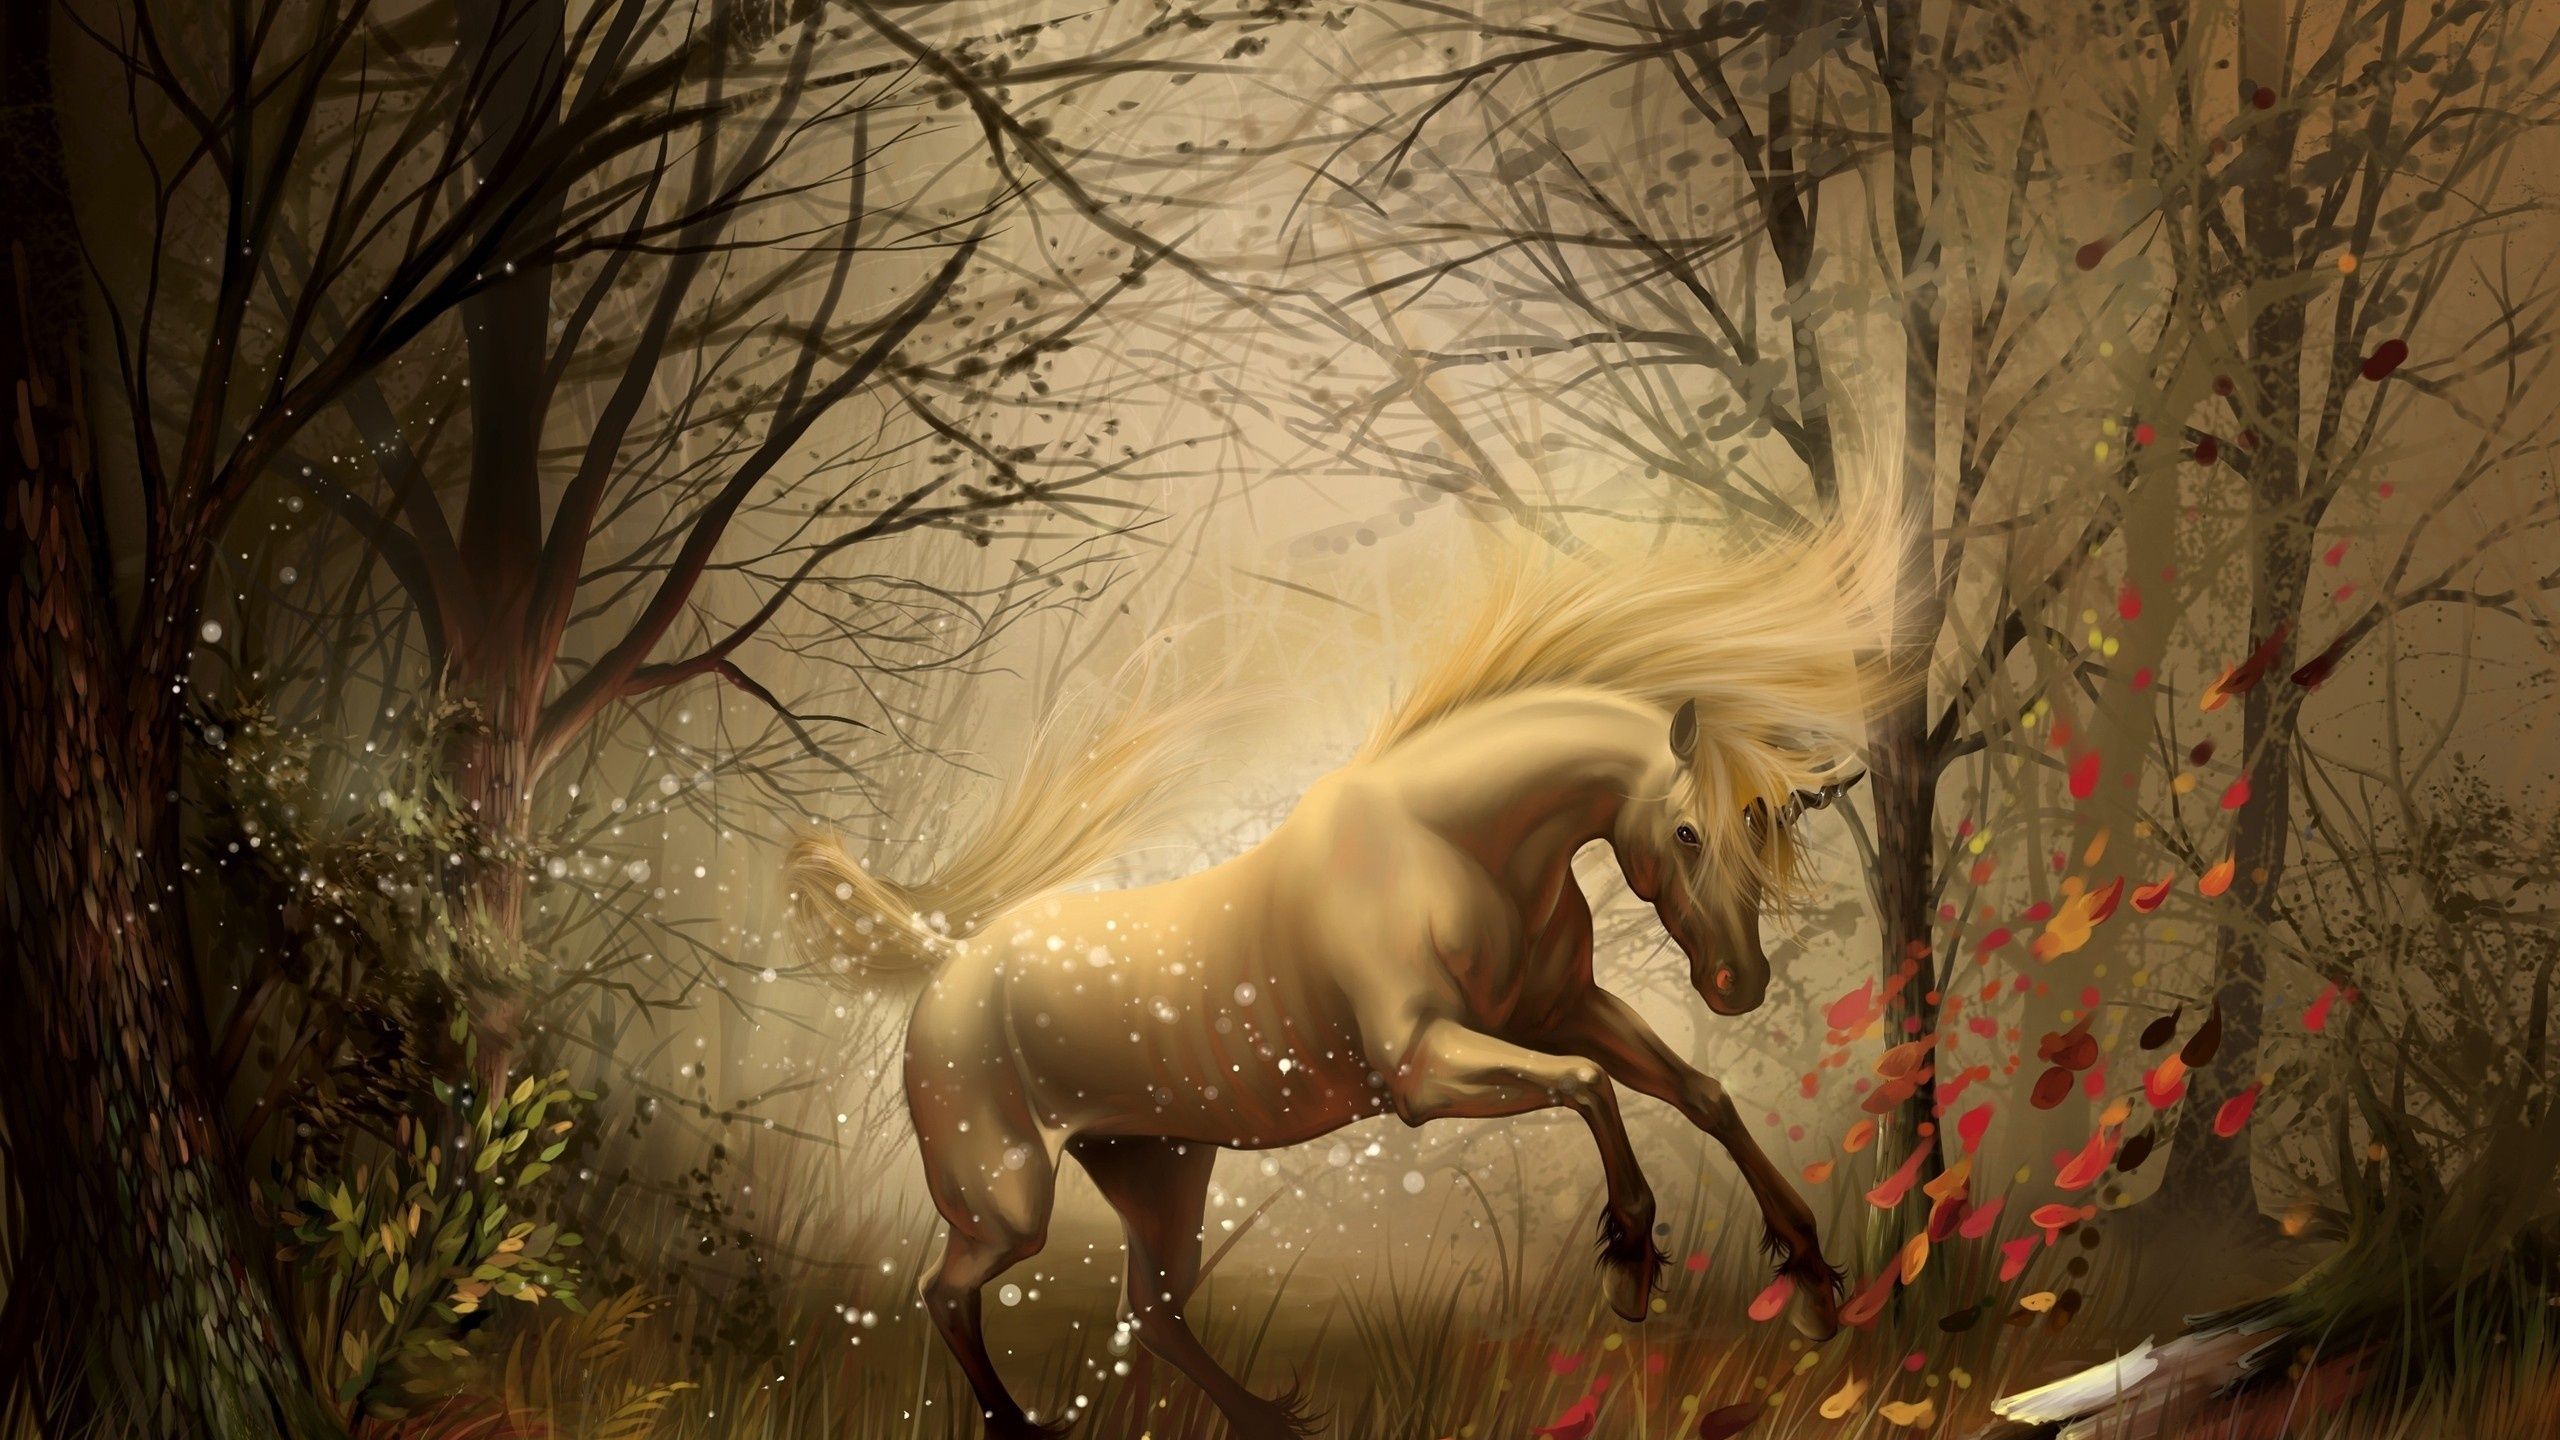 Unicorn In Dreams 1440P Resolution HD 4k Wallpaper, Image, Background, Photo and Picture